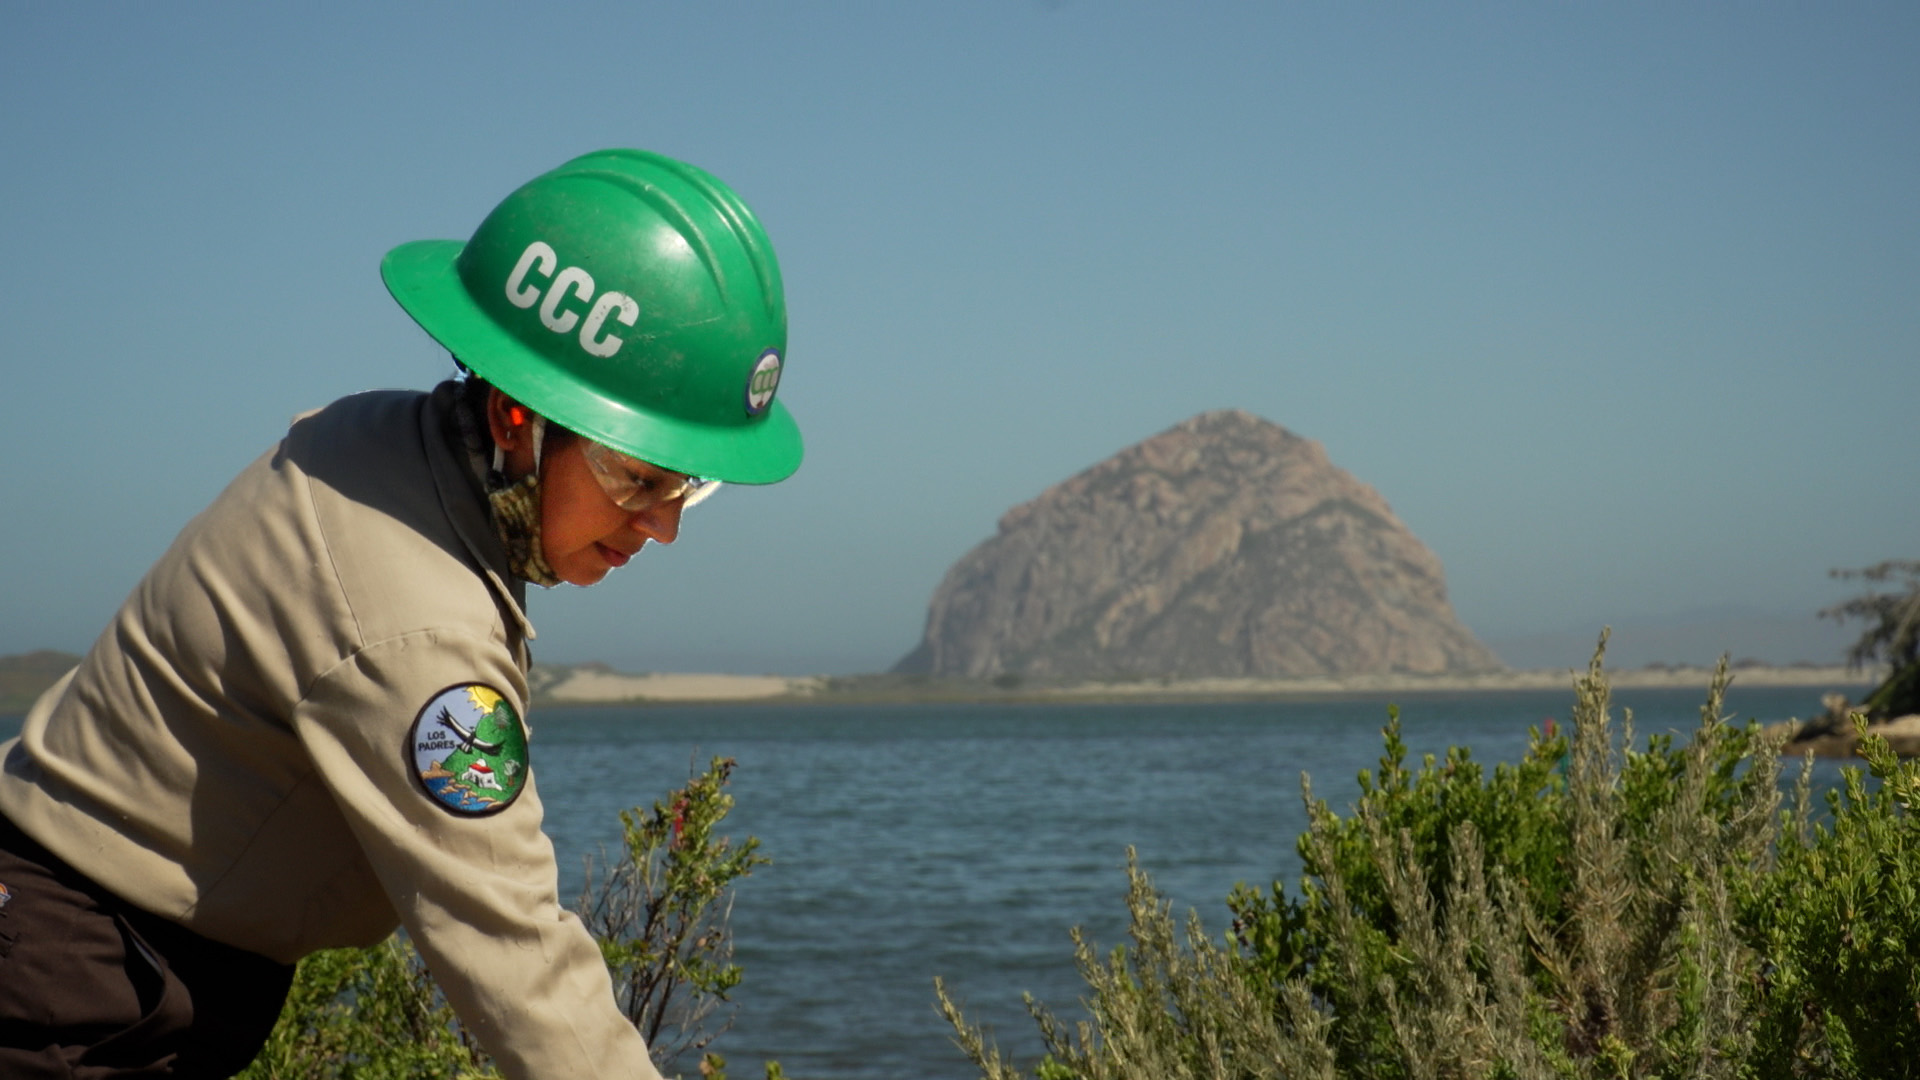 Female Corpsmember with green helmet ans safety glasses extends arm out of frame in foreground, Morro Rock and Morro Bay are in background